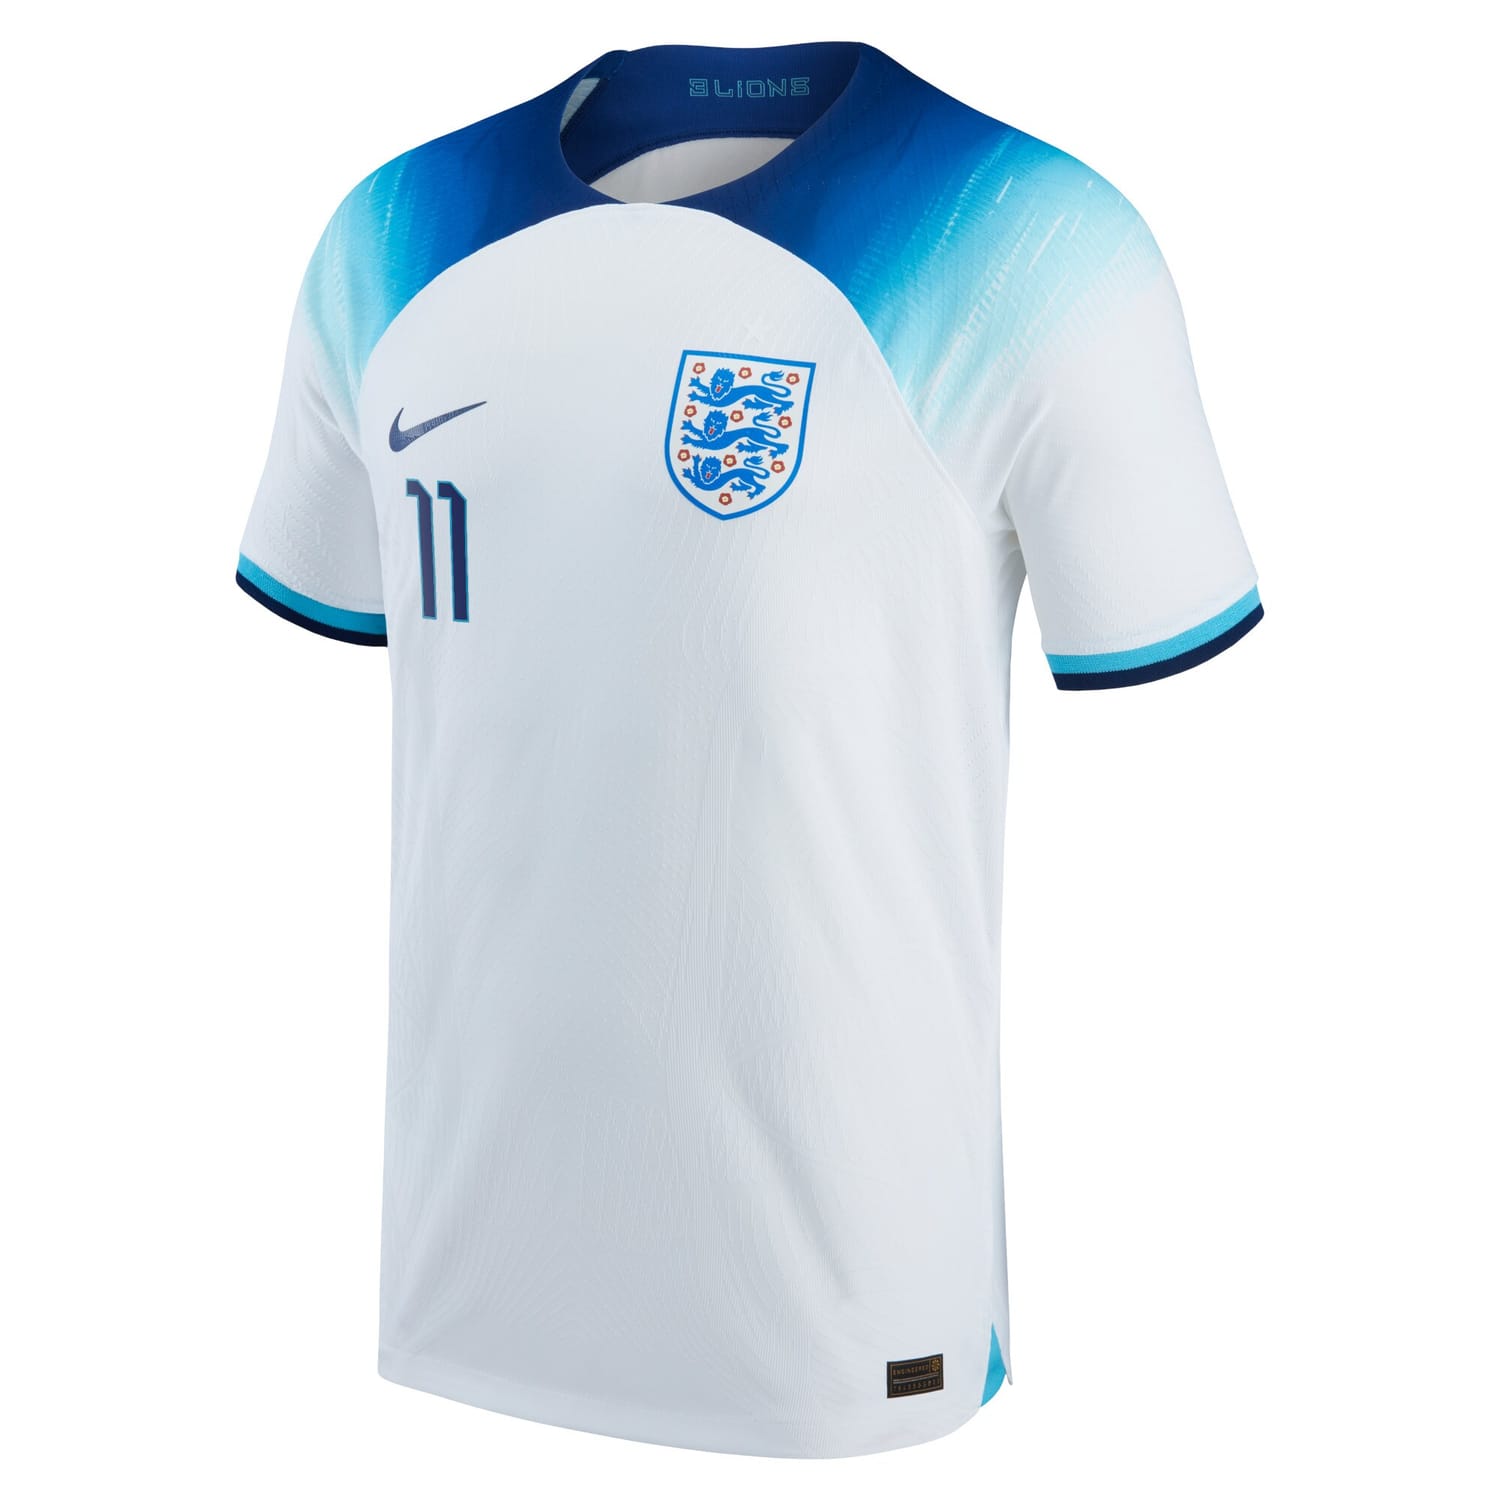 England National Team Home Authentic Jersey Shirt 2022 player Marcus Rashford 11 printing for Men